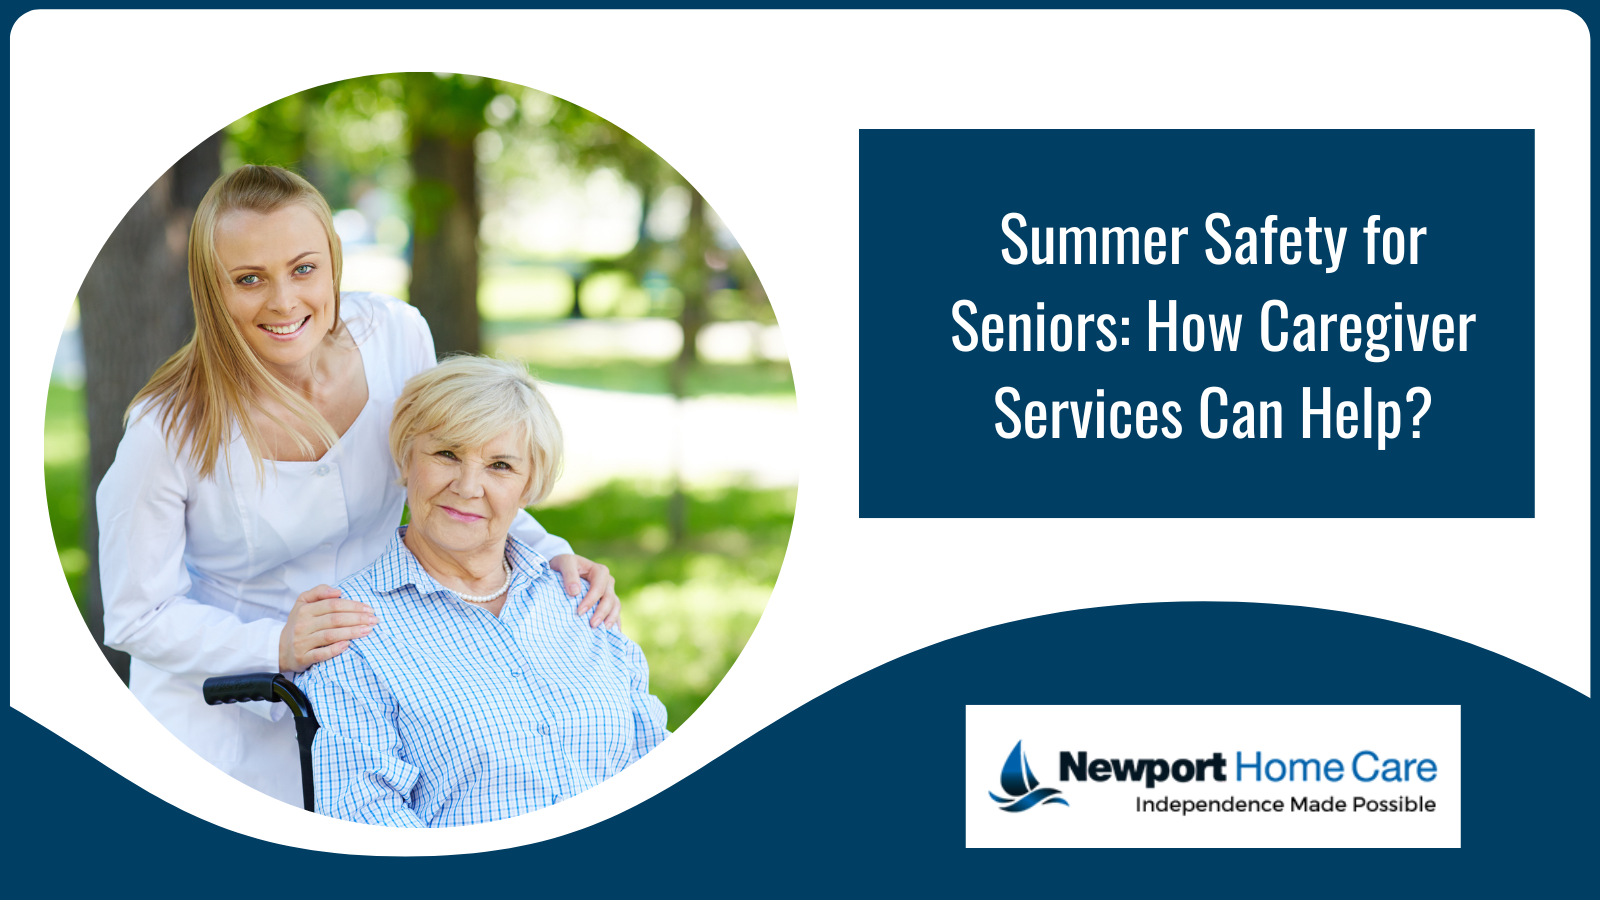 Summer Safety for Seniors: How Caregiver Services Can Help?